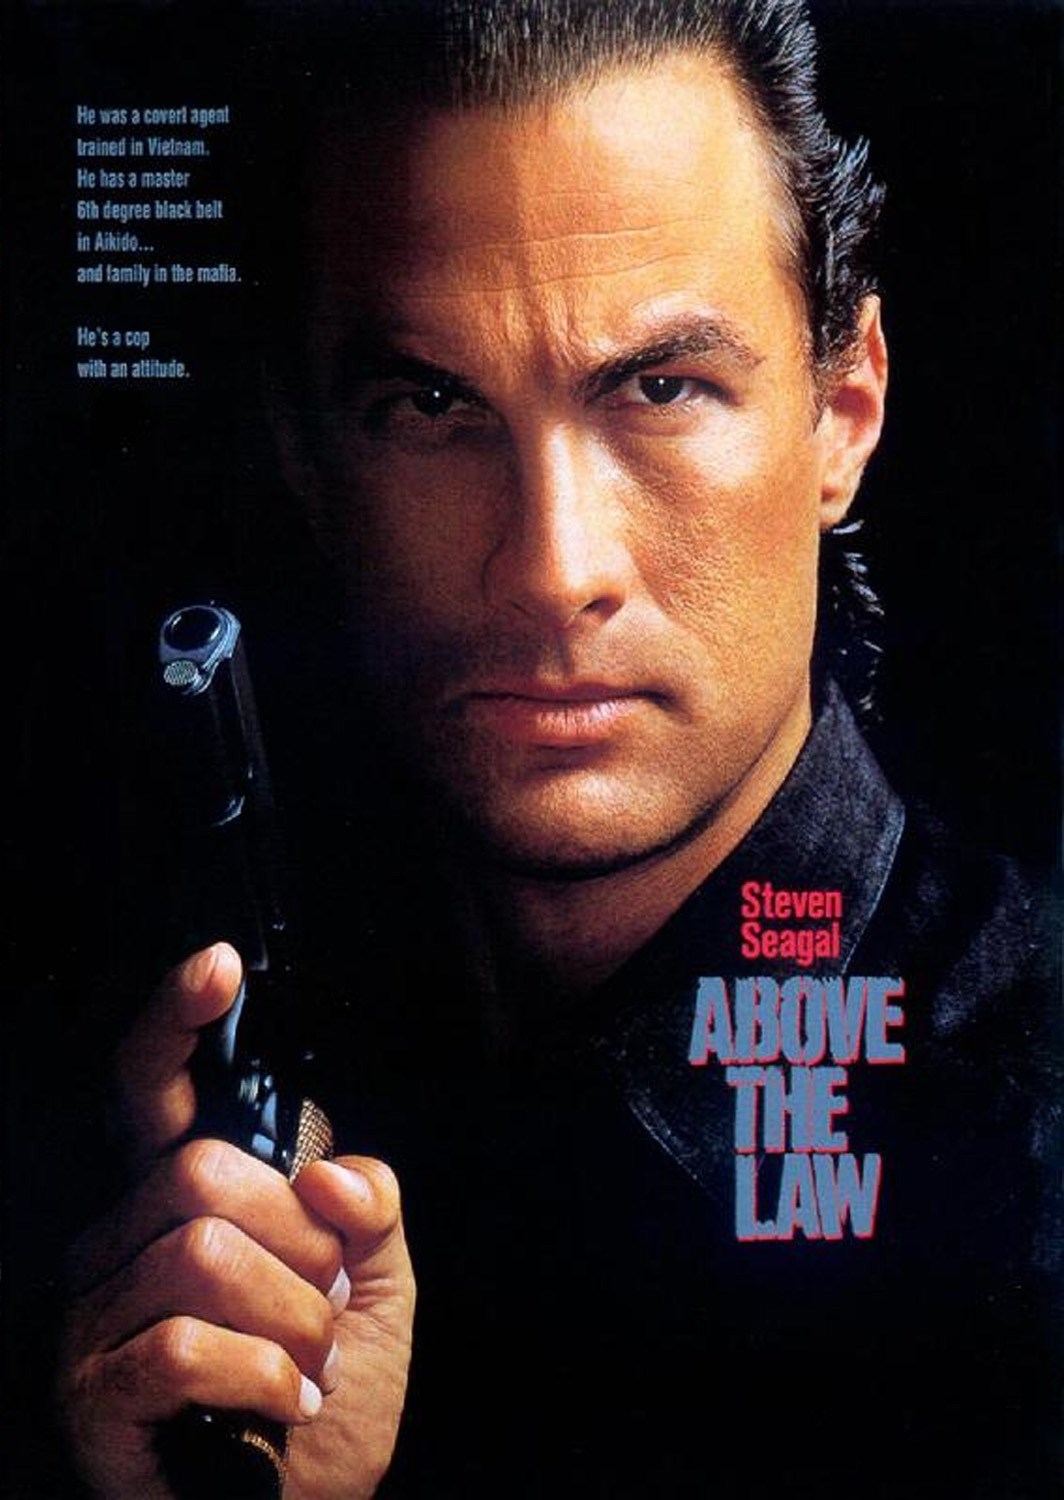 Above the Law 1988